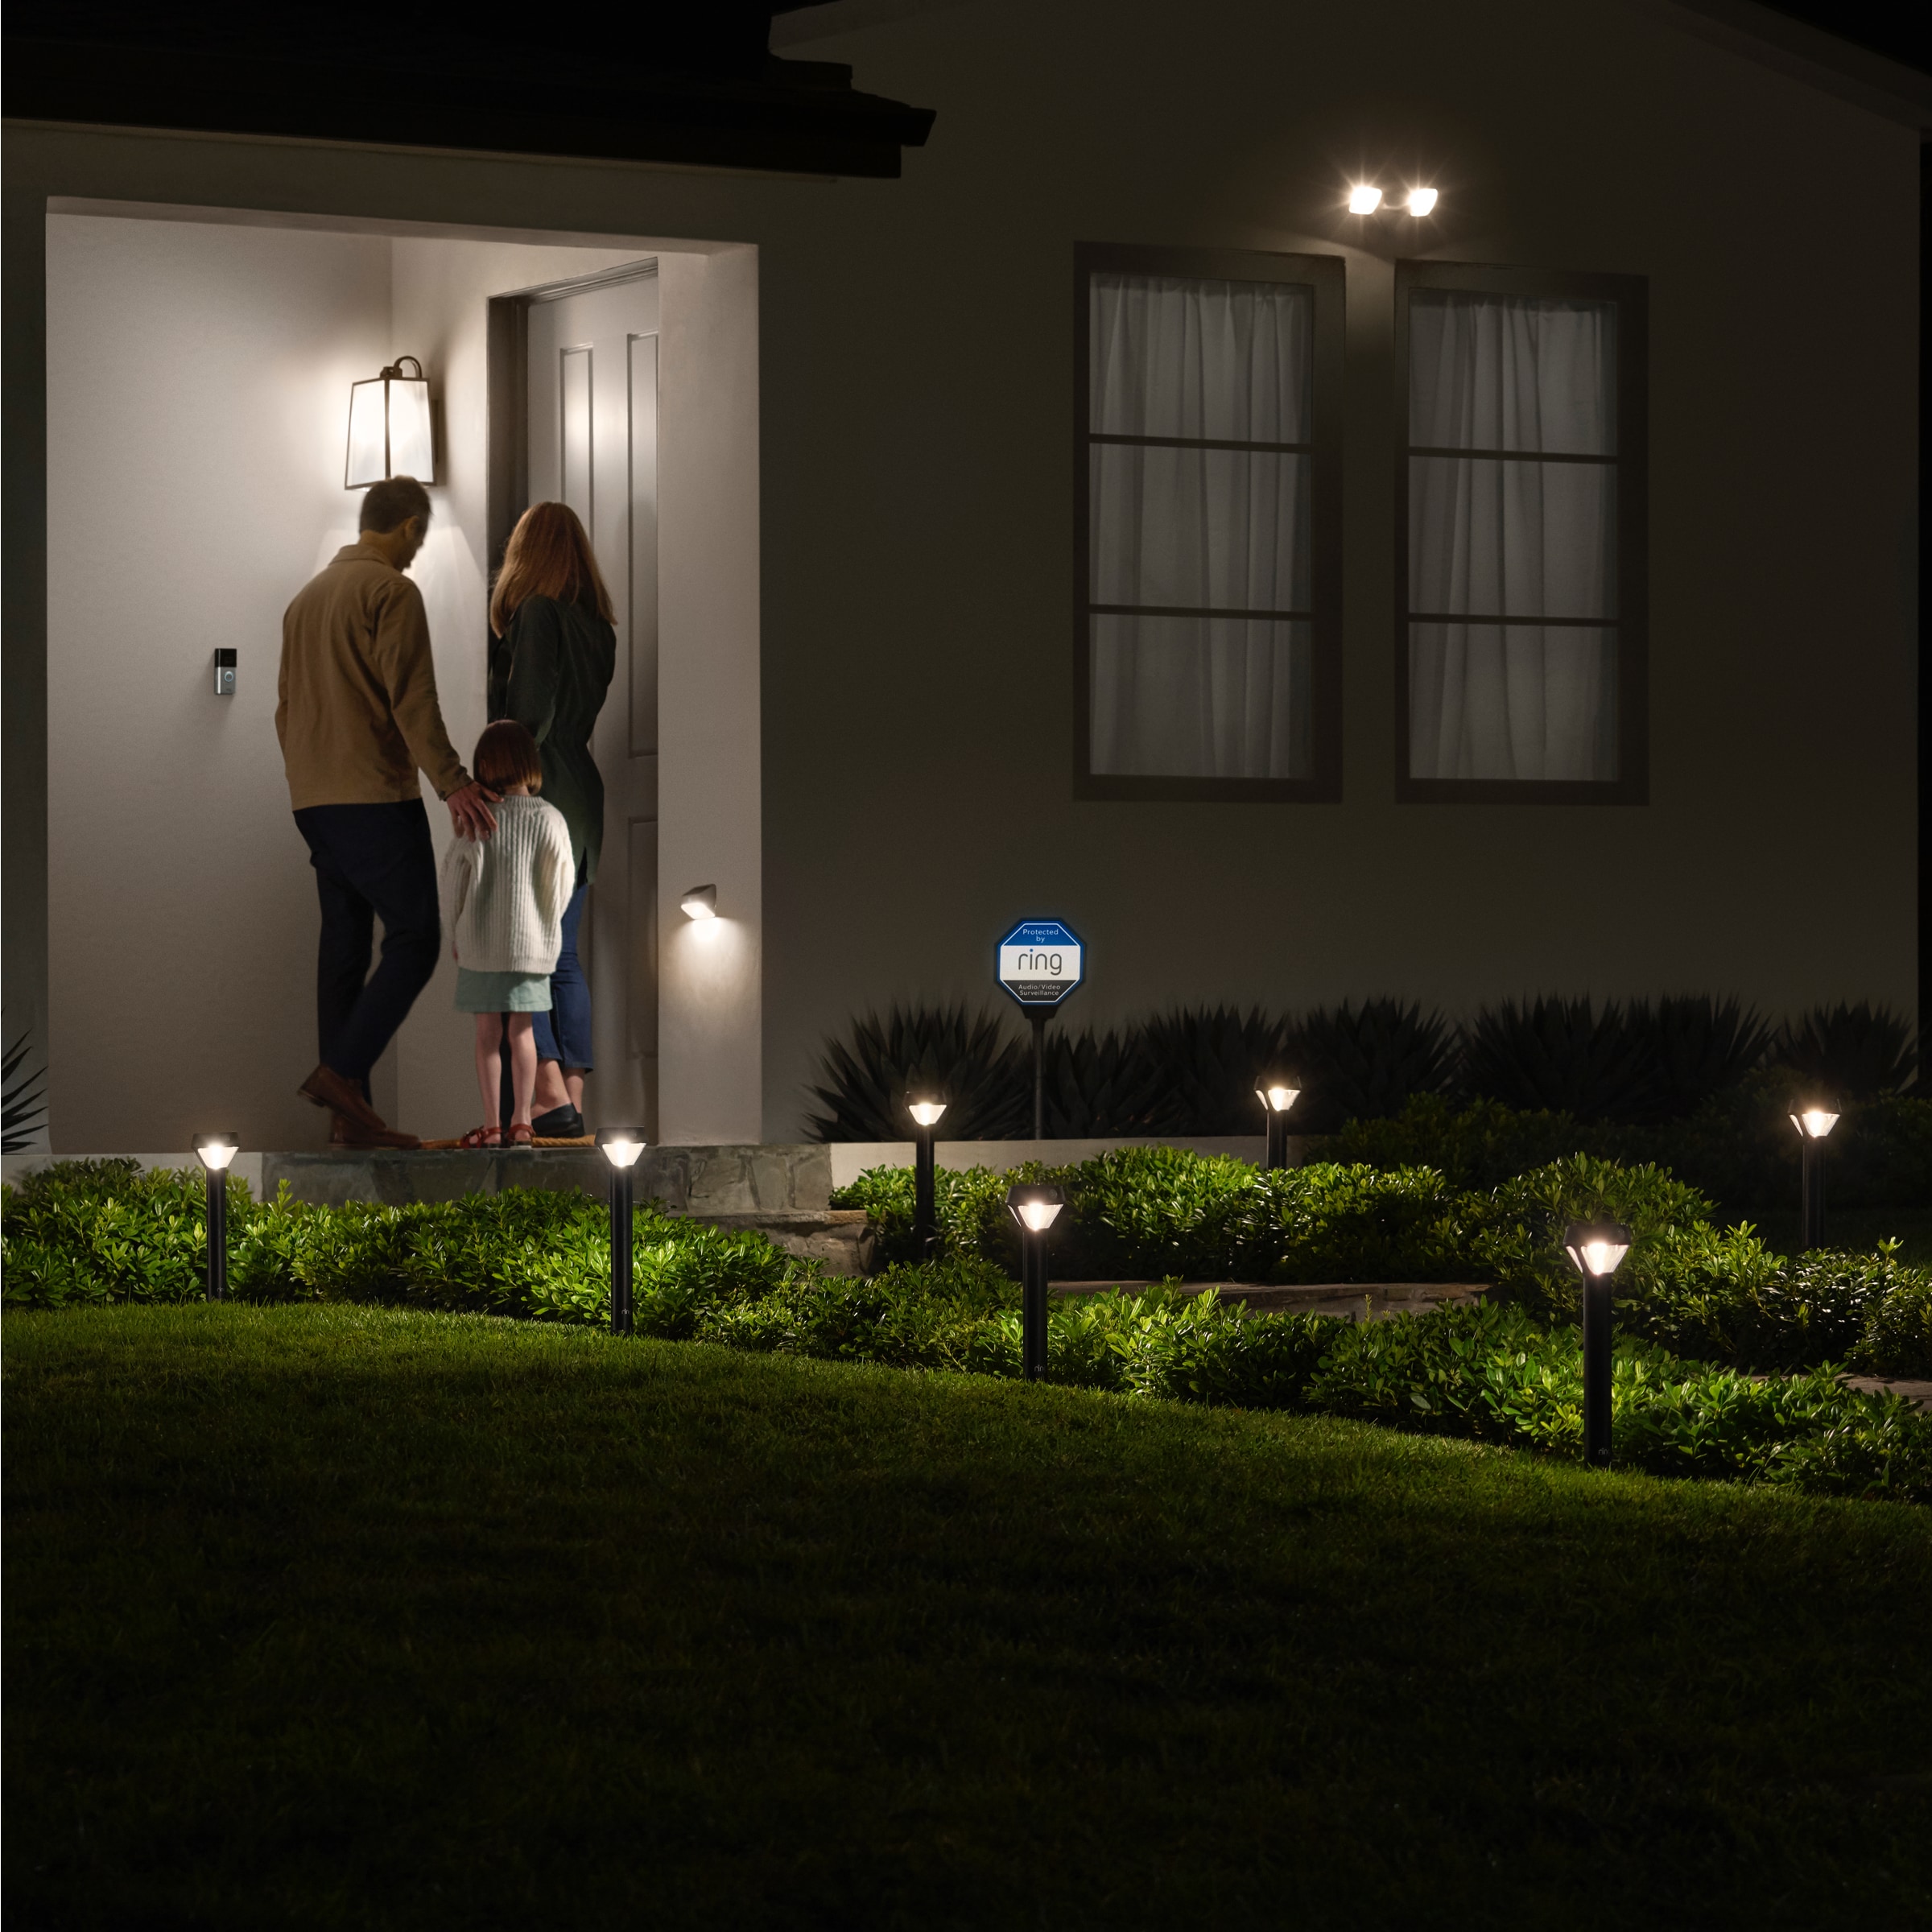 Ring Smart Lighting Solar Floodlight Review: A Bright Choice